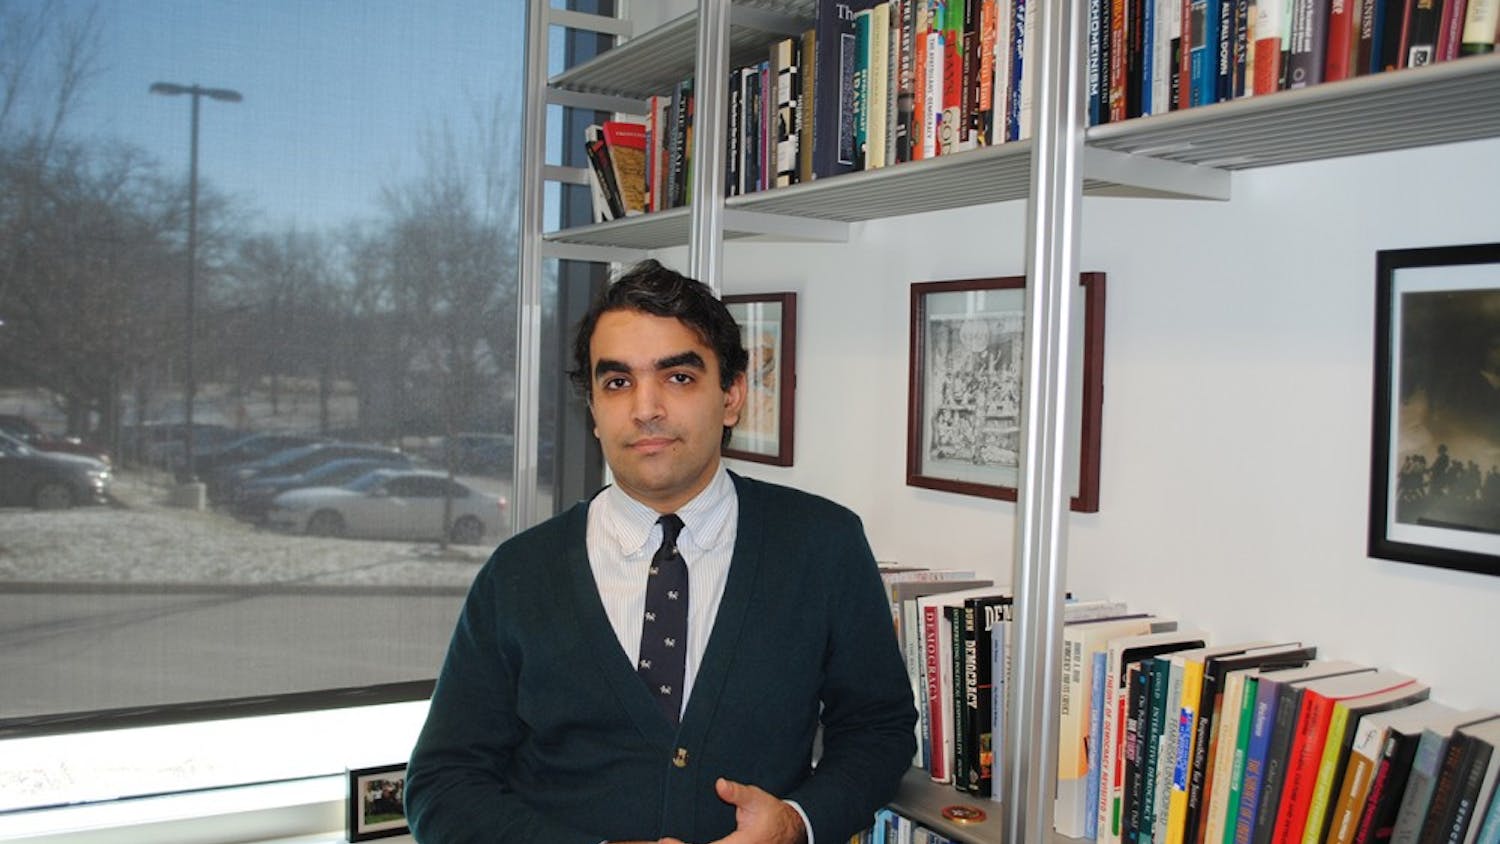 Hussein Banai became a naturalized citizen this January but was originally born in Iran and then later lived in Canada. He sees Trump's executive order banning travel to his former home of Iran as a sign of a dangerous and rising nationalism.